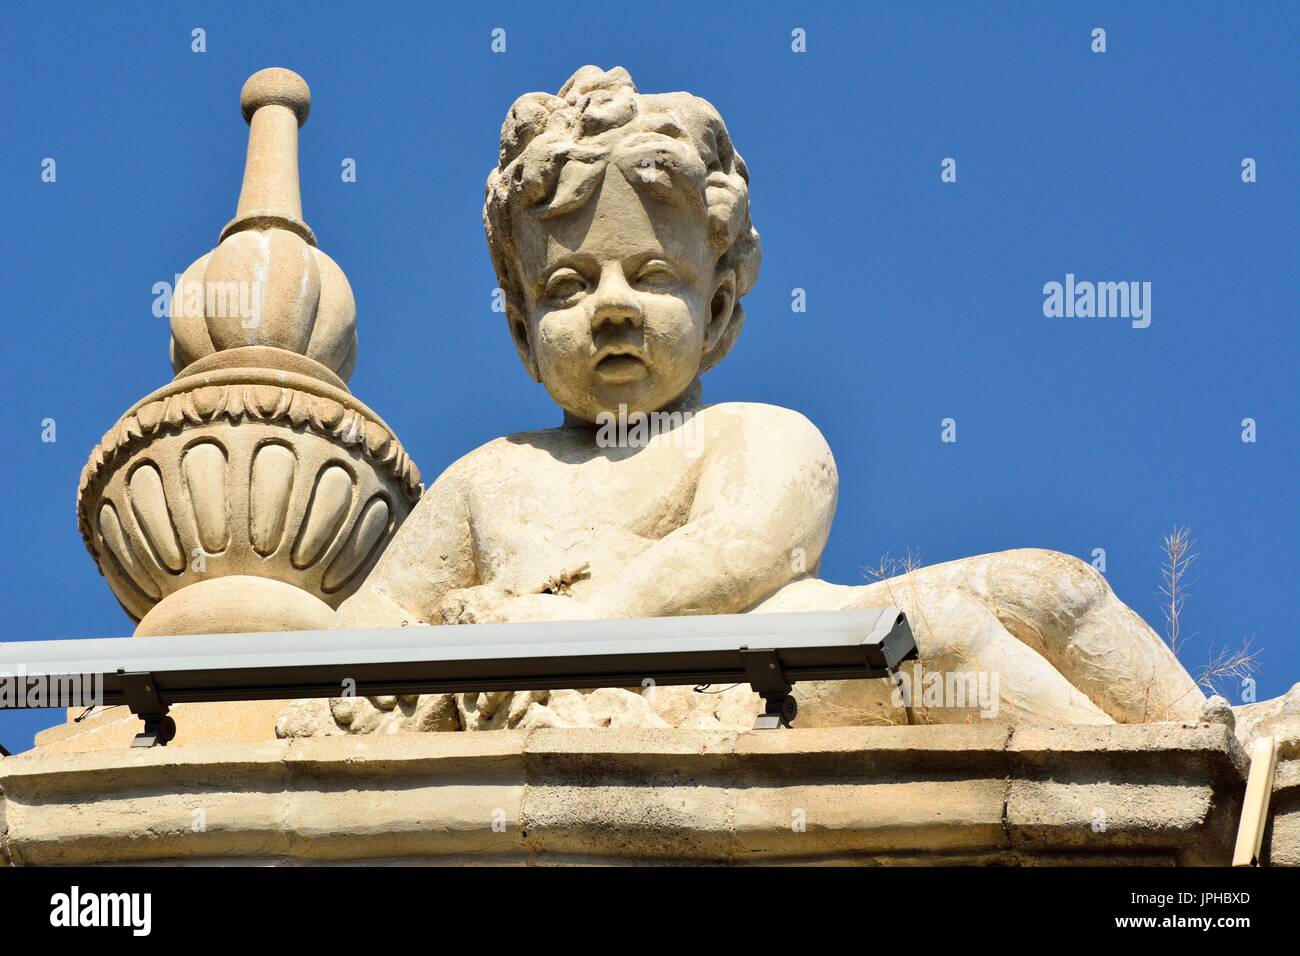 Sculpture of angel boy on facade of architectural building in downtown Baku. Stock Photo